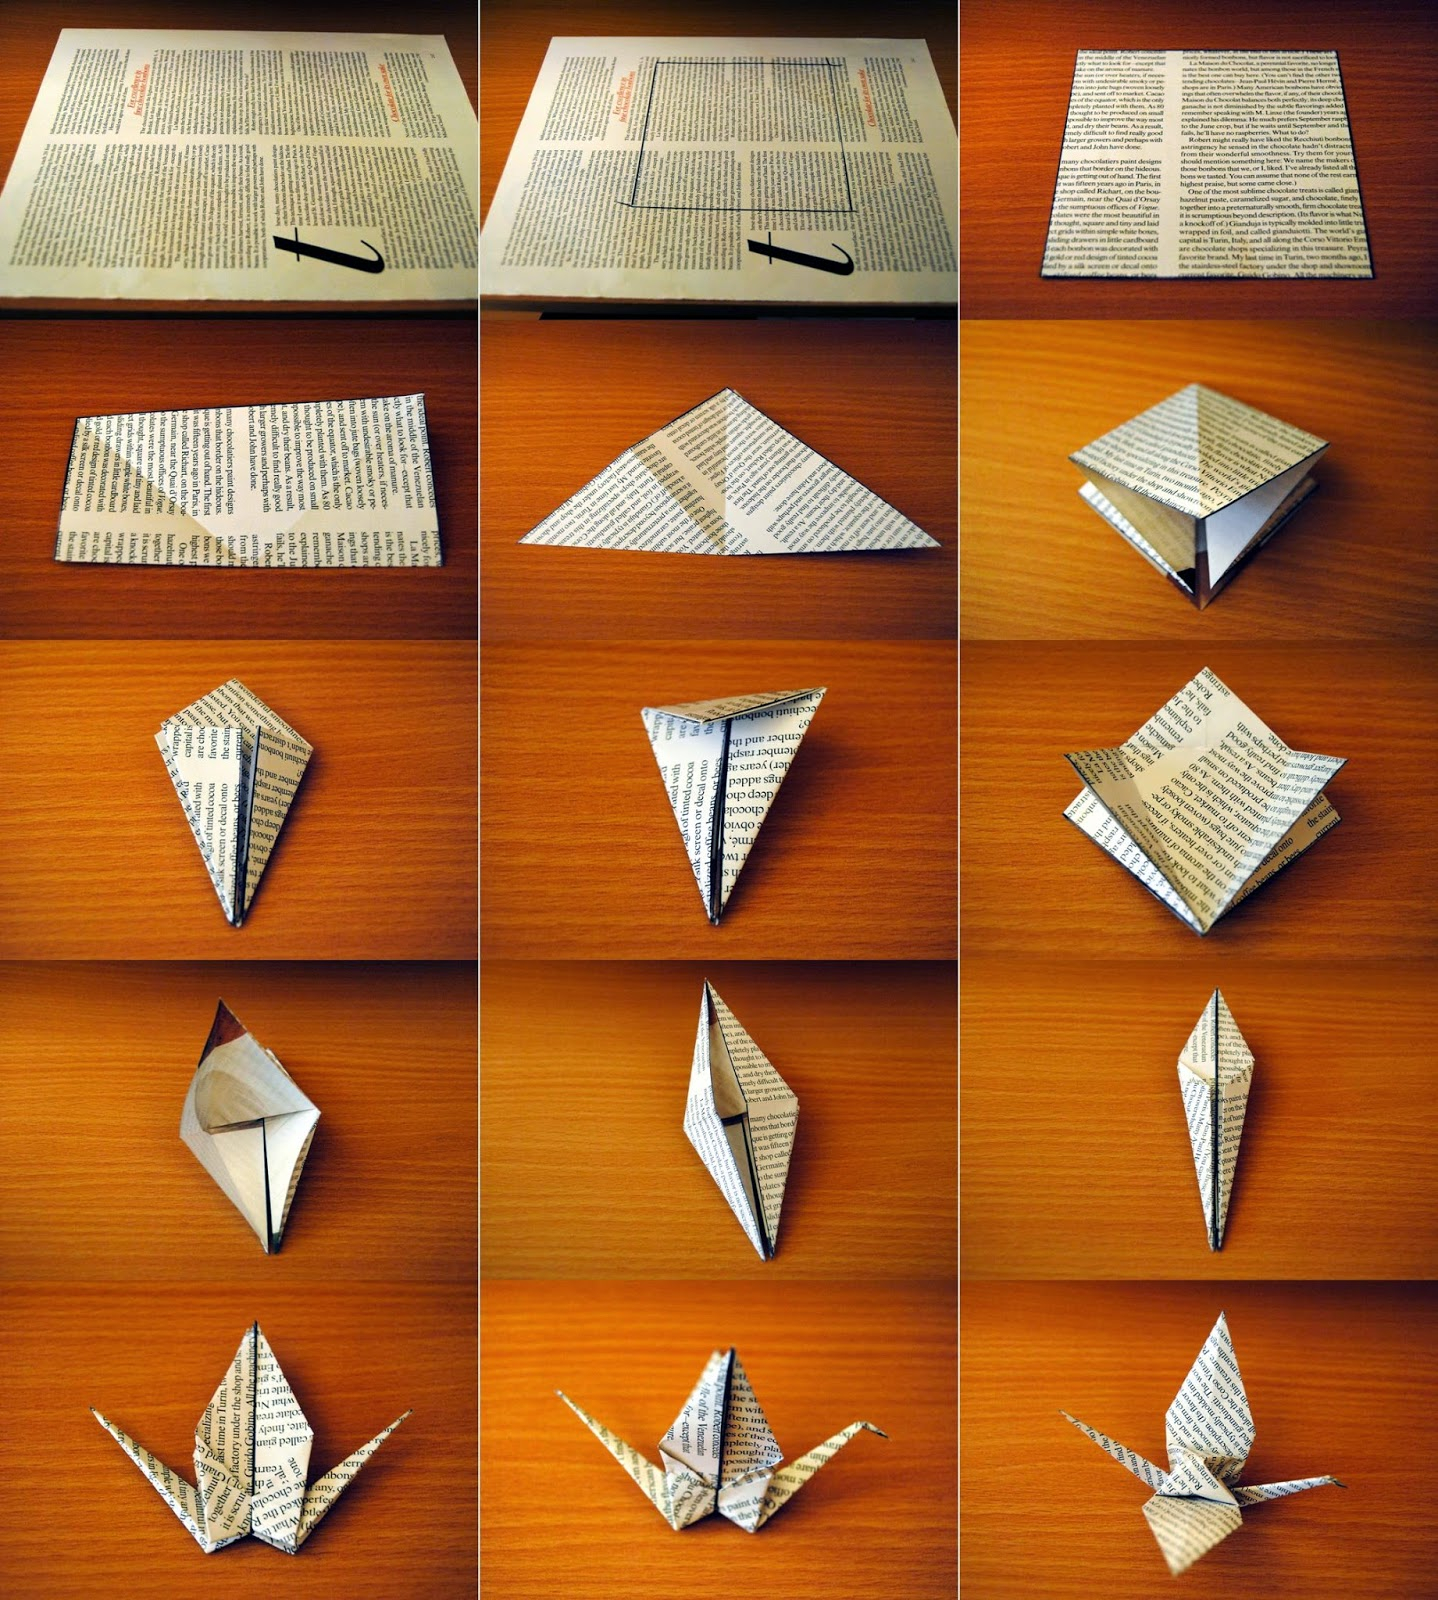 How To Make An Origami Crane Step By Step How To Make An Origami Crane Step Step 3d Easy Origami For Kids